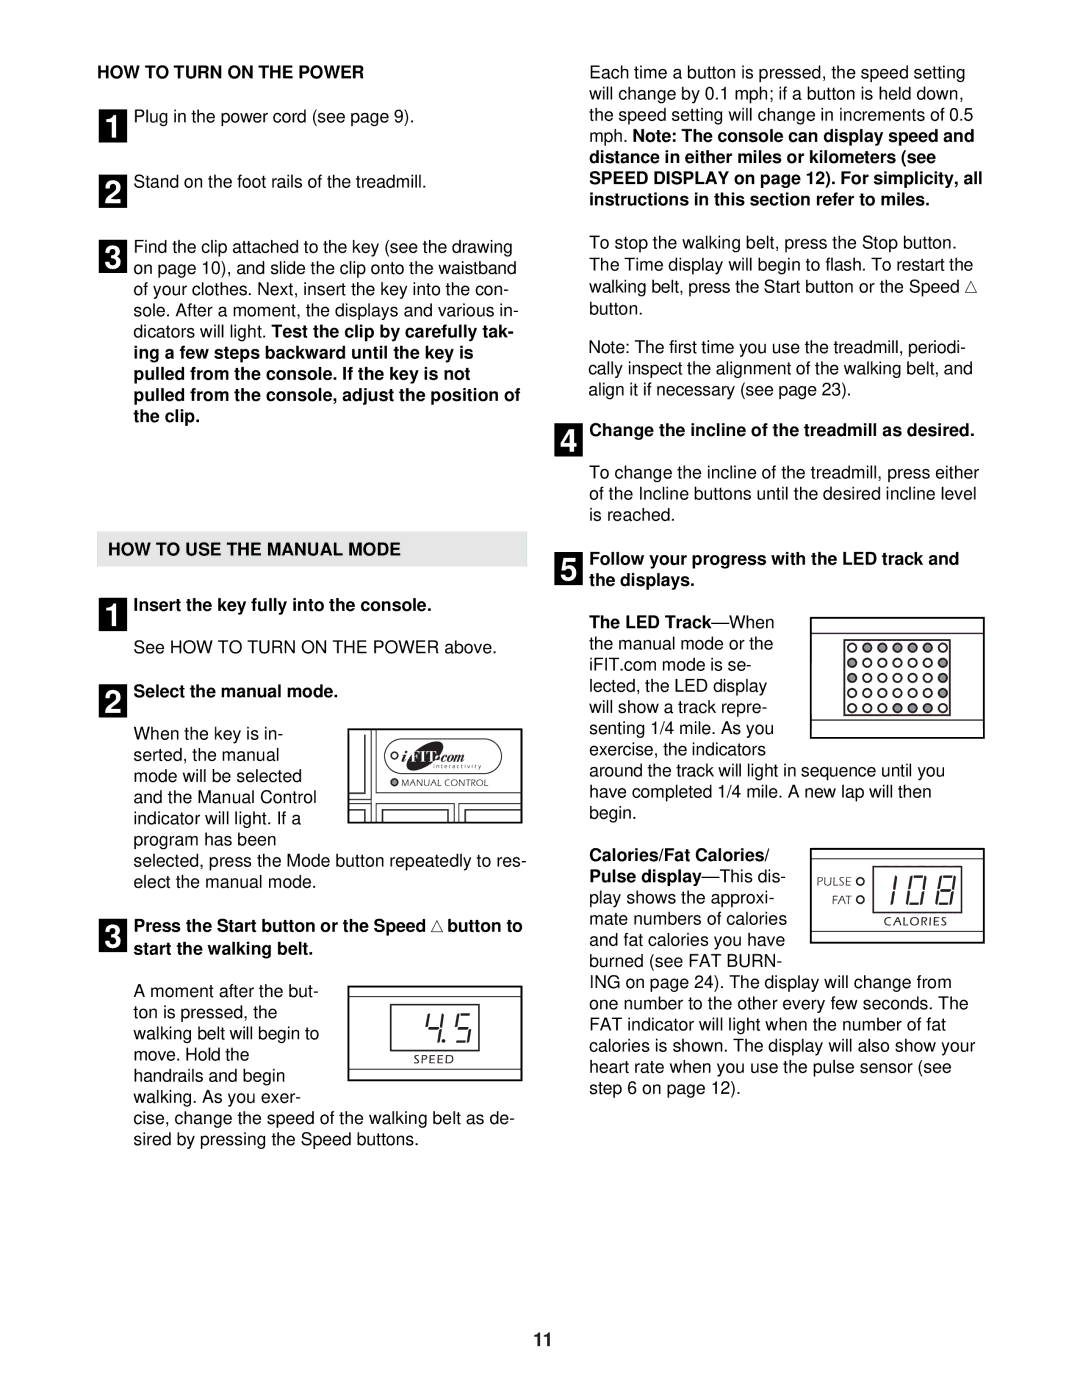 Weslo WLTL39323 user manual HOW to Turn on the Power, HOW to USE the Manual Mode 